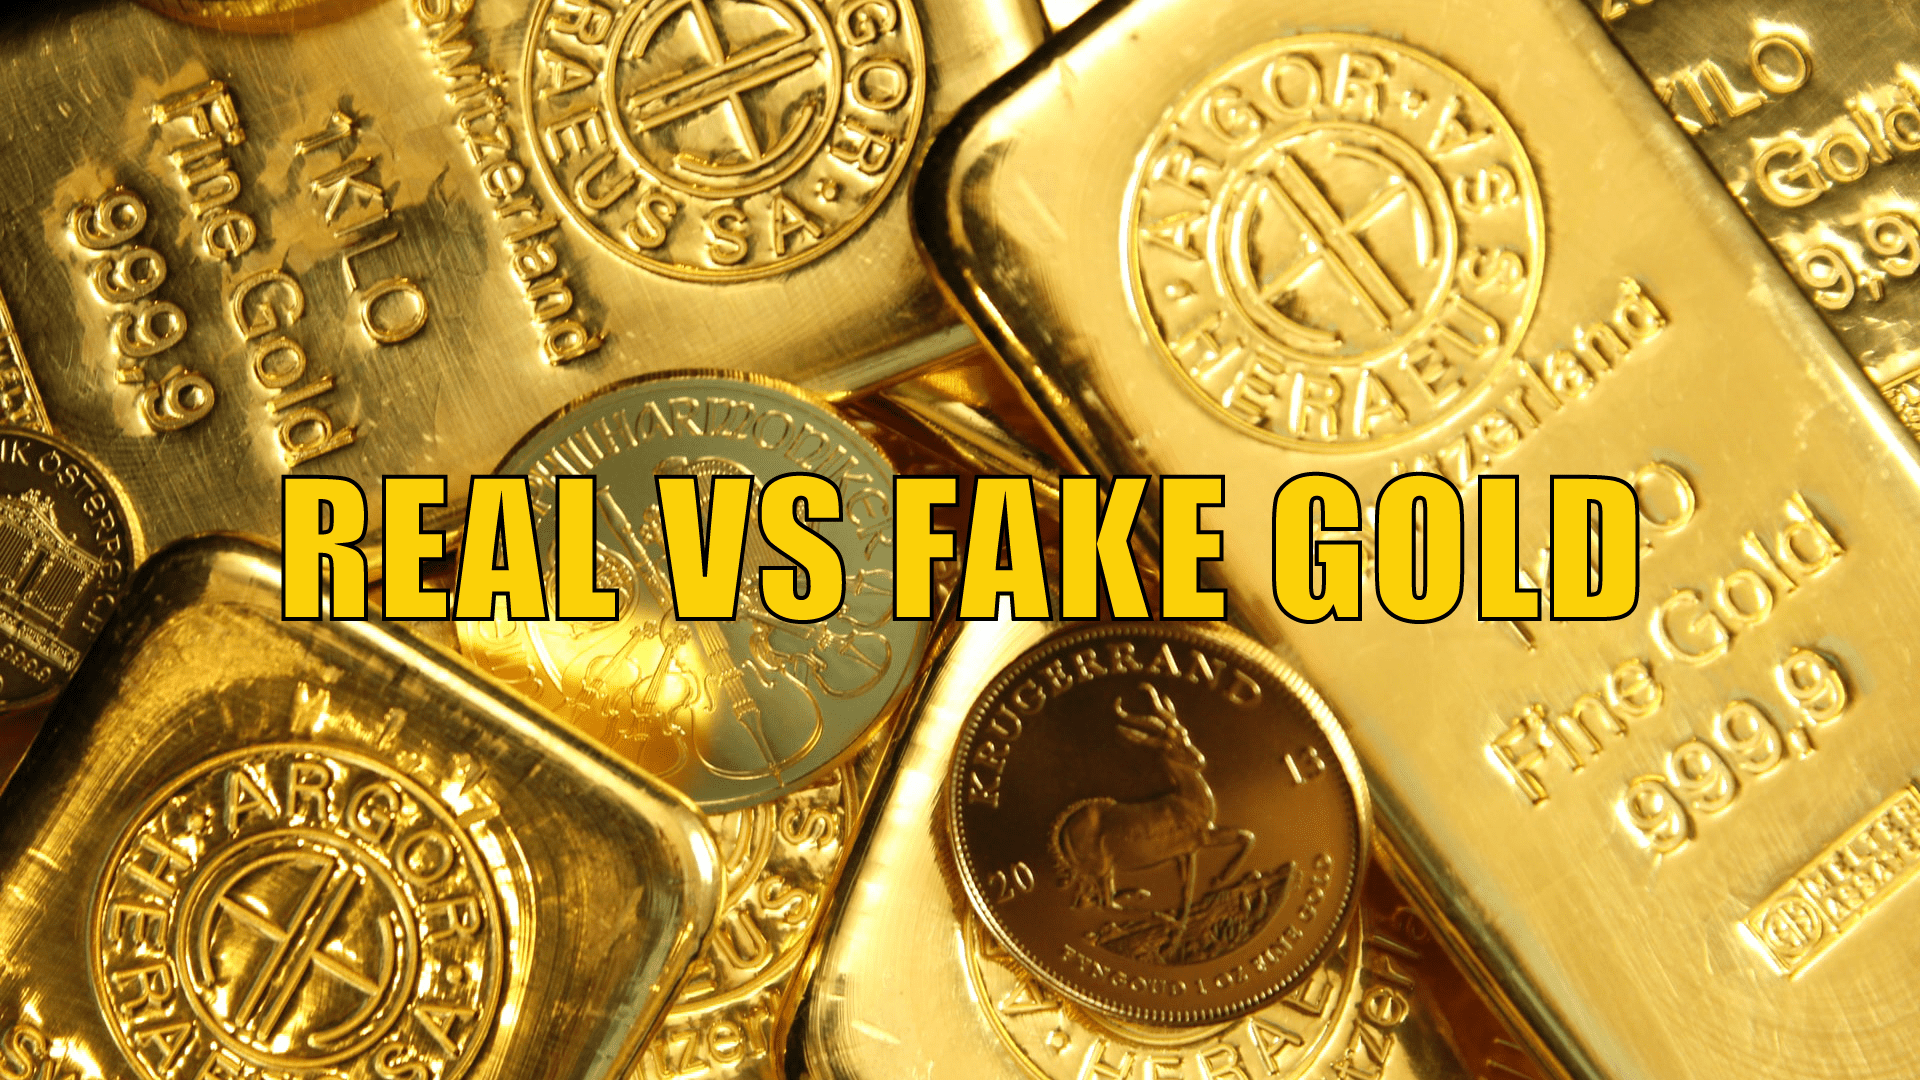 How to Test Gold at Home with a Magnet: Spot Fake Gold Fast